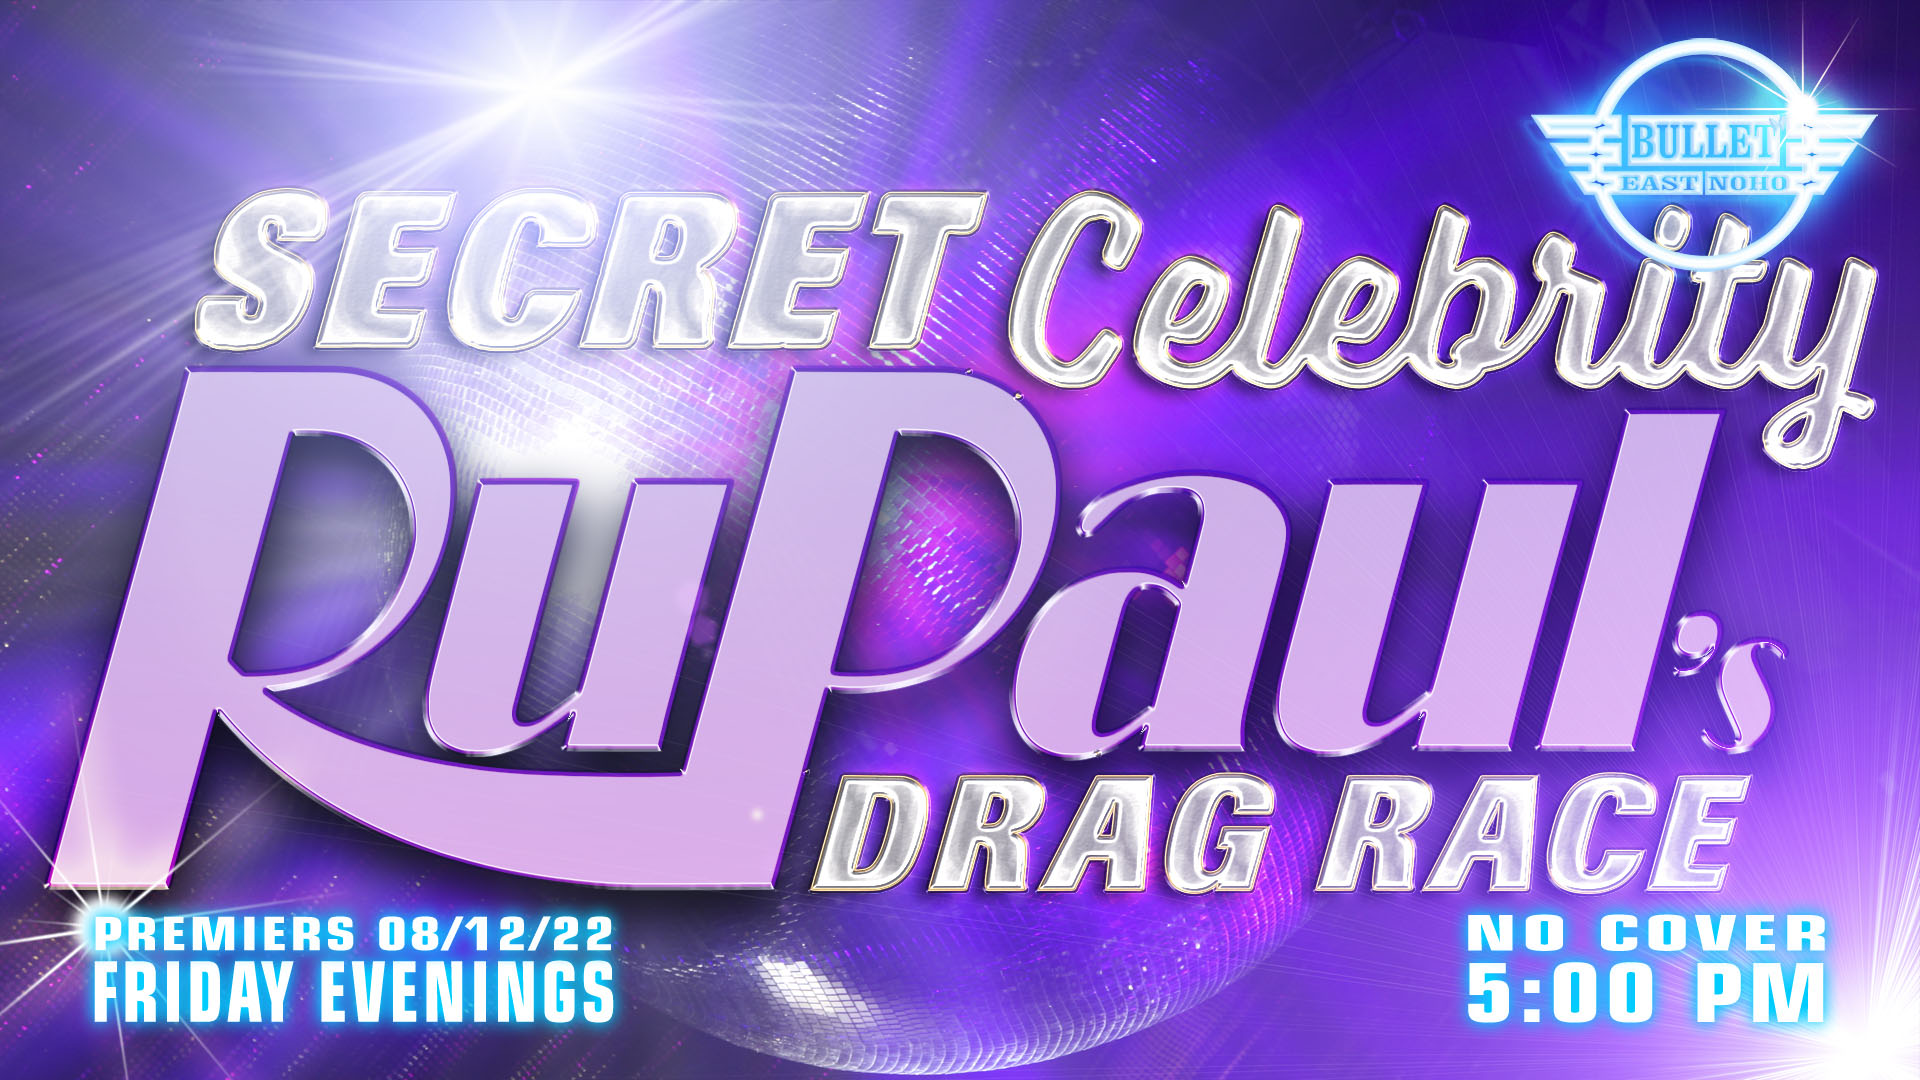 The Bullet Bar Presents RuPaul's Secret Celebrity Drag Race Season 2: Friday Evenings at 5PM! No cover.